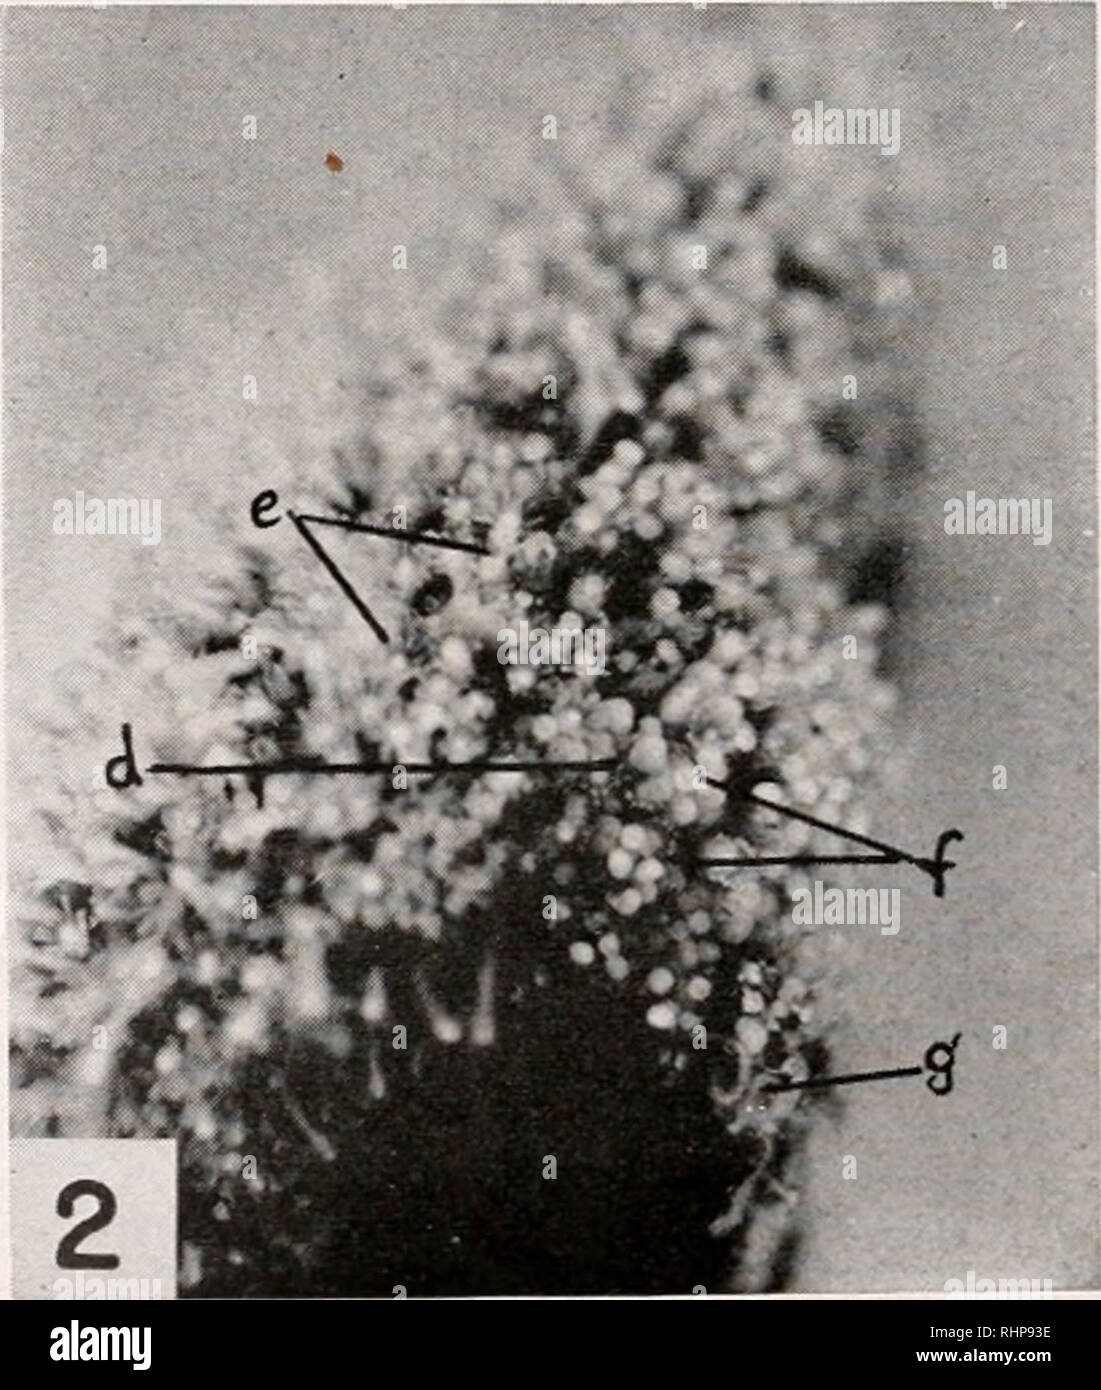 . The Biological bulletin. Biology; Zoology; Biology; Marine Biology. PLATE I FIG. 1. Male colony of Hydractinia just starting to shed sperm, (o) Gono- zooid bearing two white ripe gonophores and two translucent unripe gonophores; (b) feeding polyp; (c} spiral streams of sperm from ruptured gonophores. To- ward lower right, a foggy area full of dispersing sperm. About 6 X. FIG. 2. Female colony of Hydnictiniit just starting to shed eggs, (d) Gono- phores containing ripe unshed eggs; (c) feeding polyps; (/) clusters of eggs just shed; (&lt;/) stinging polyps around lip of snail shell. About 6 X Stock Photo